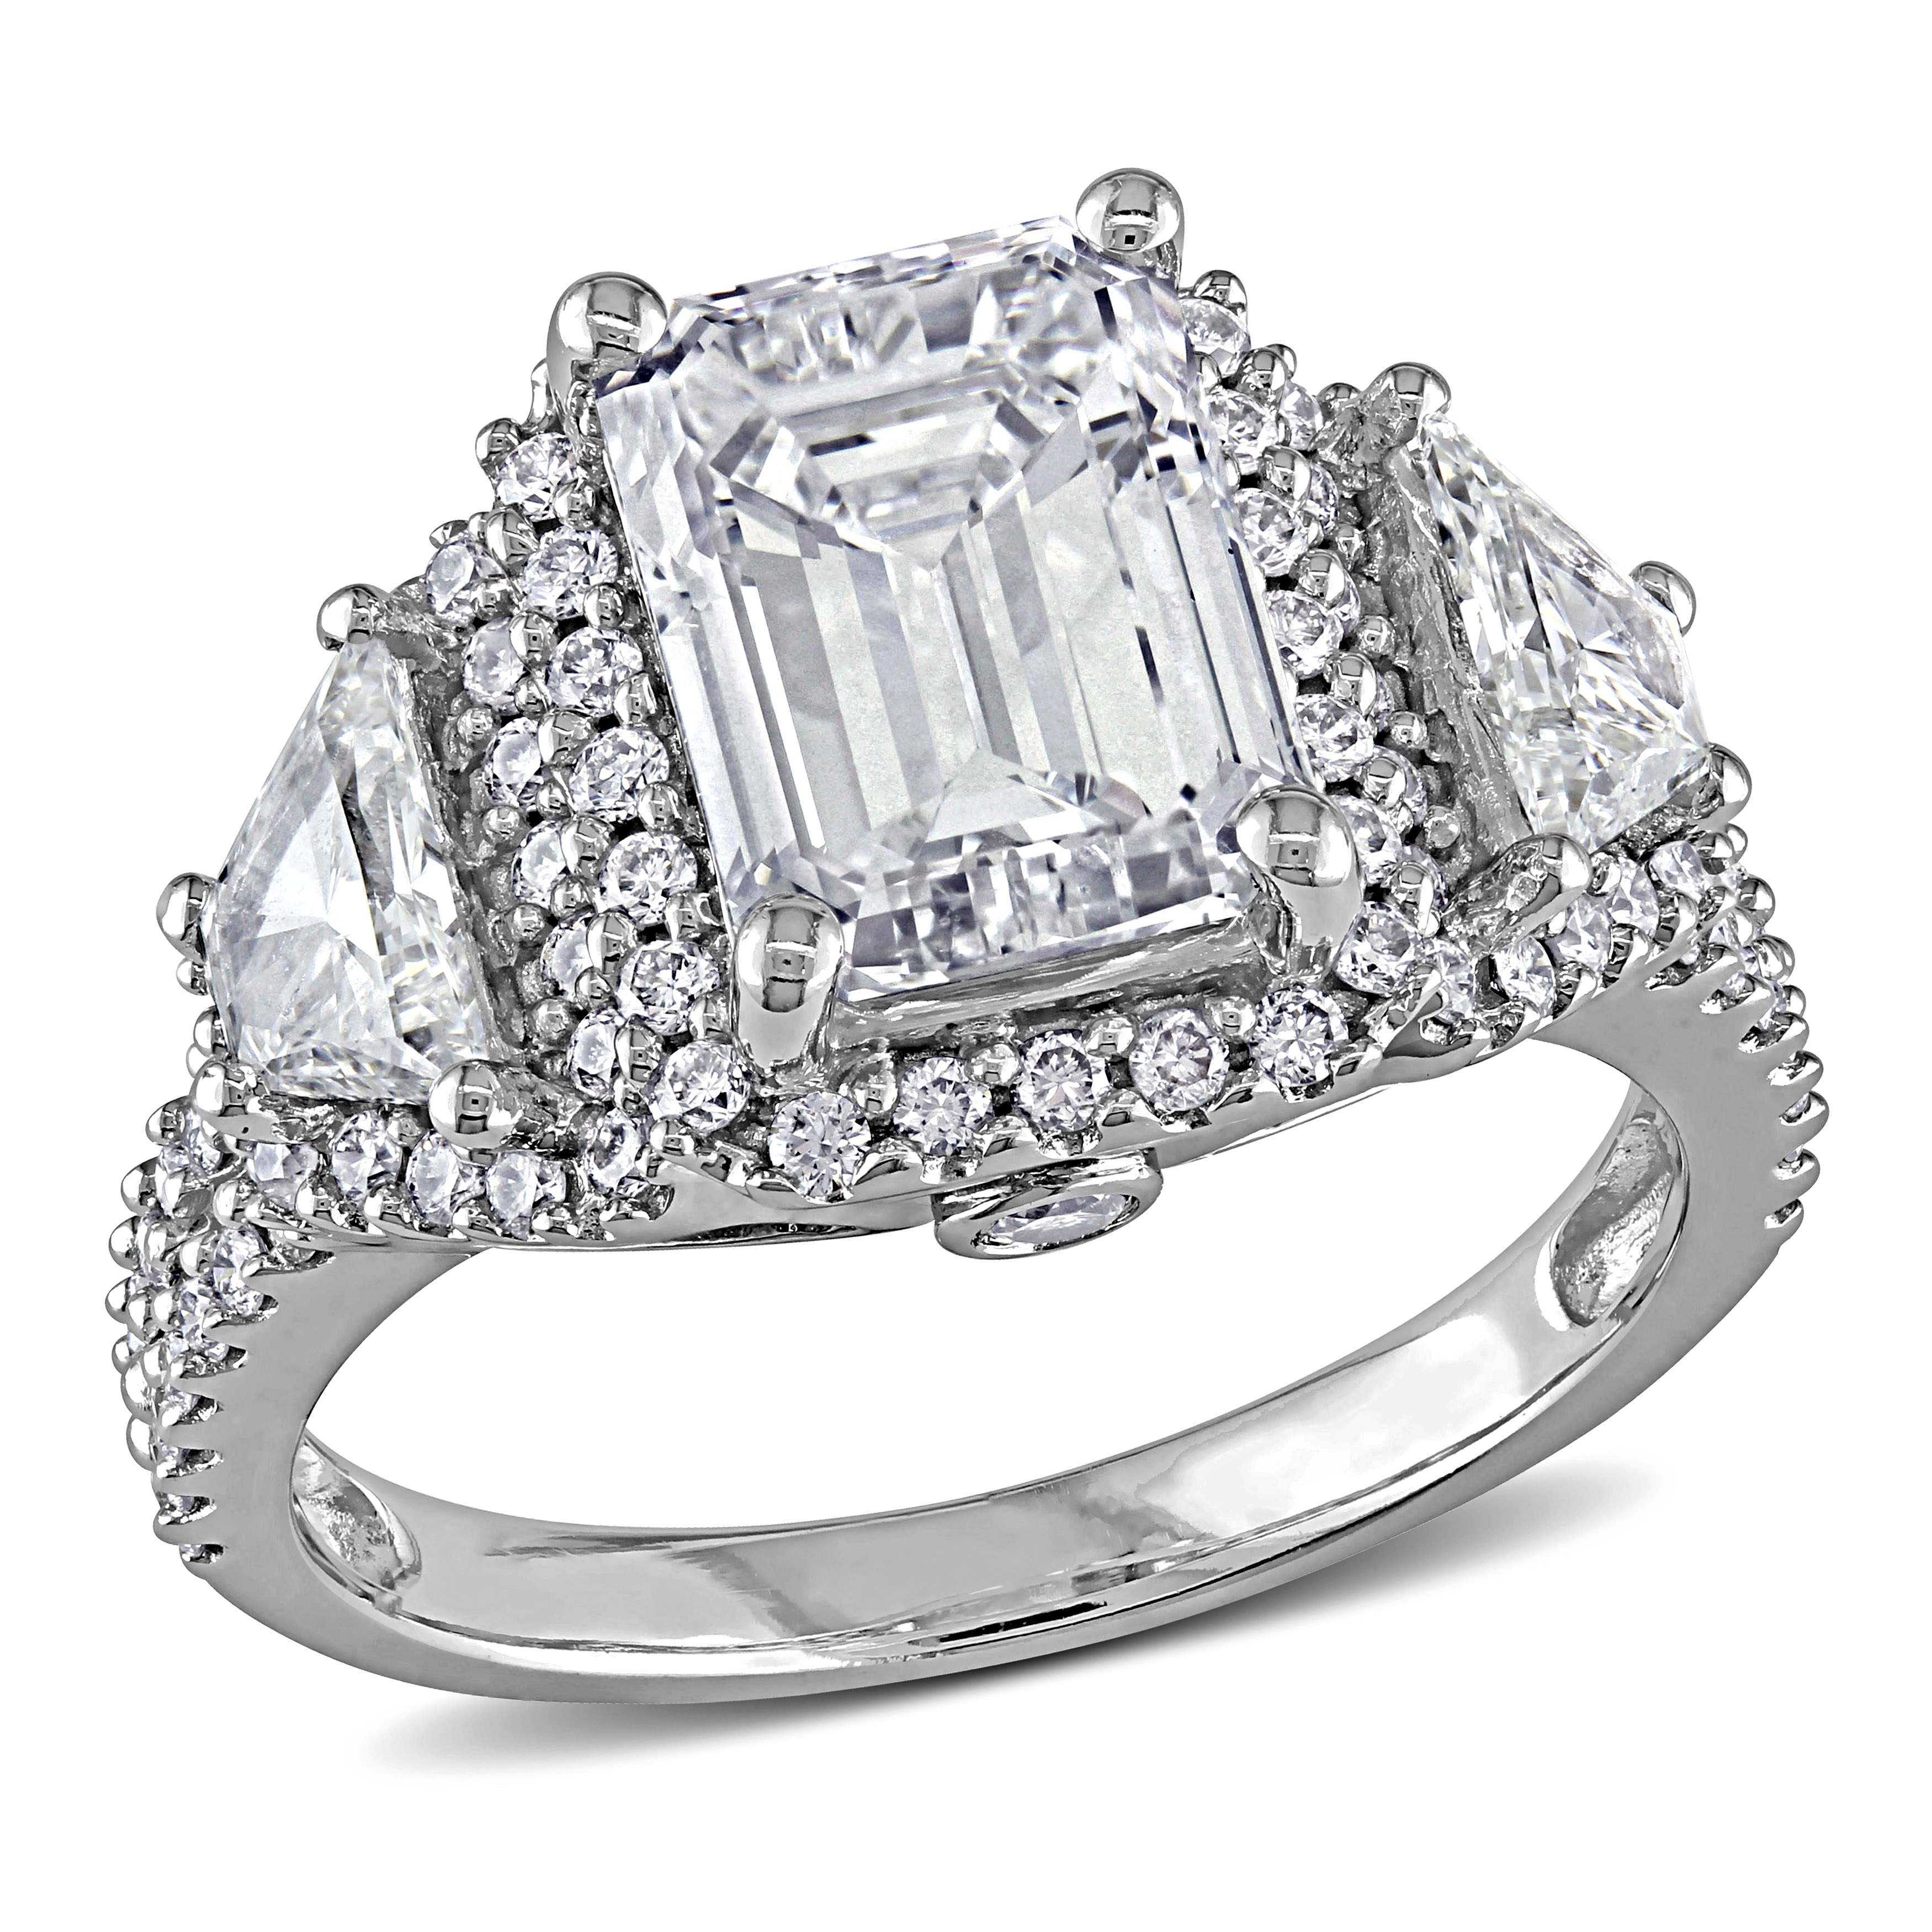 3 3/4 CT TW Emerald Cut, Trapezoid and Round Diamond Halo Engagement Ring in 14k White Gold